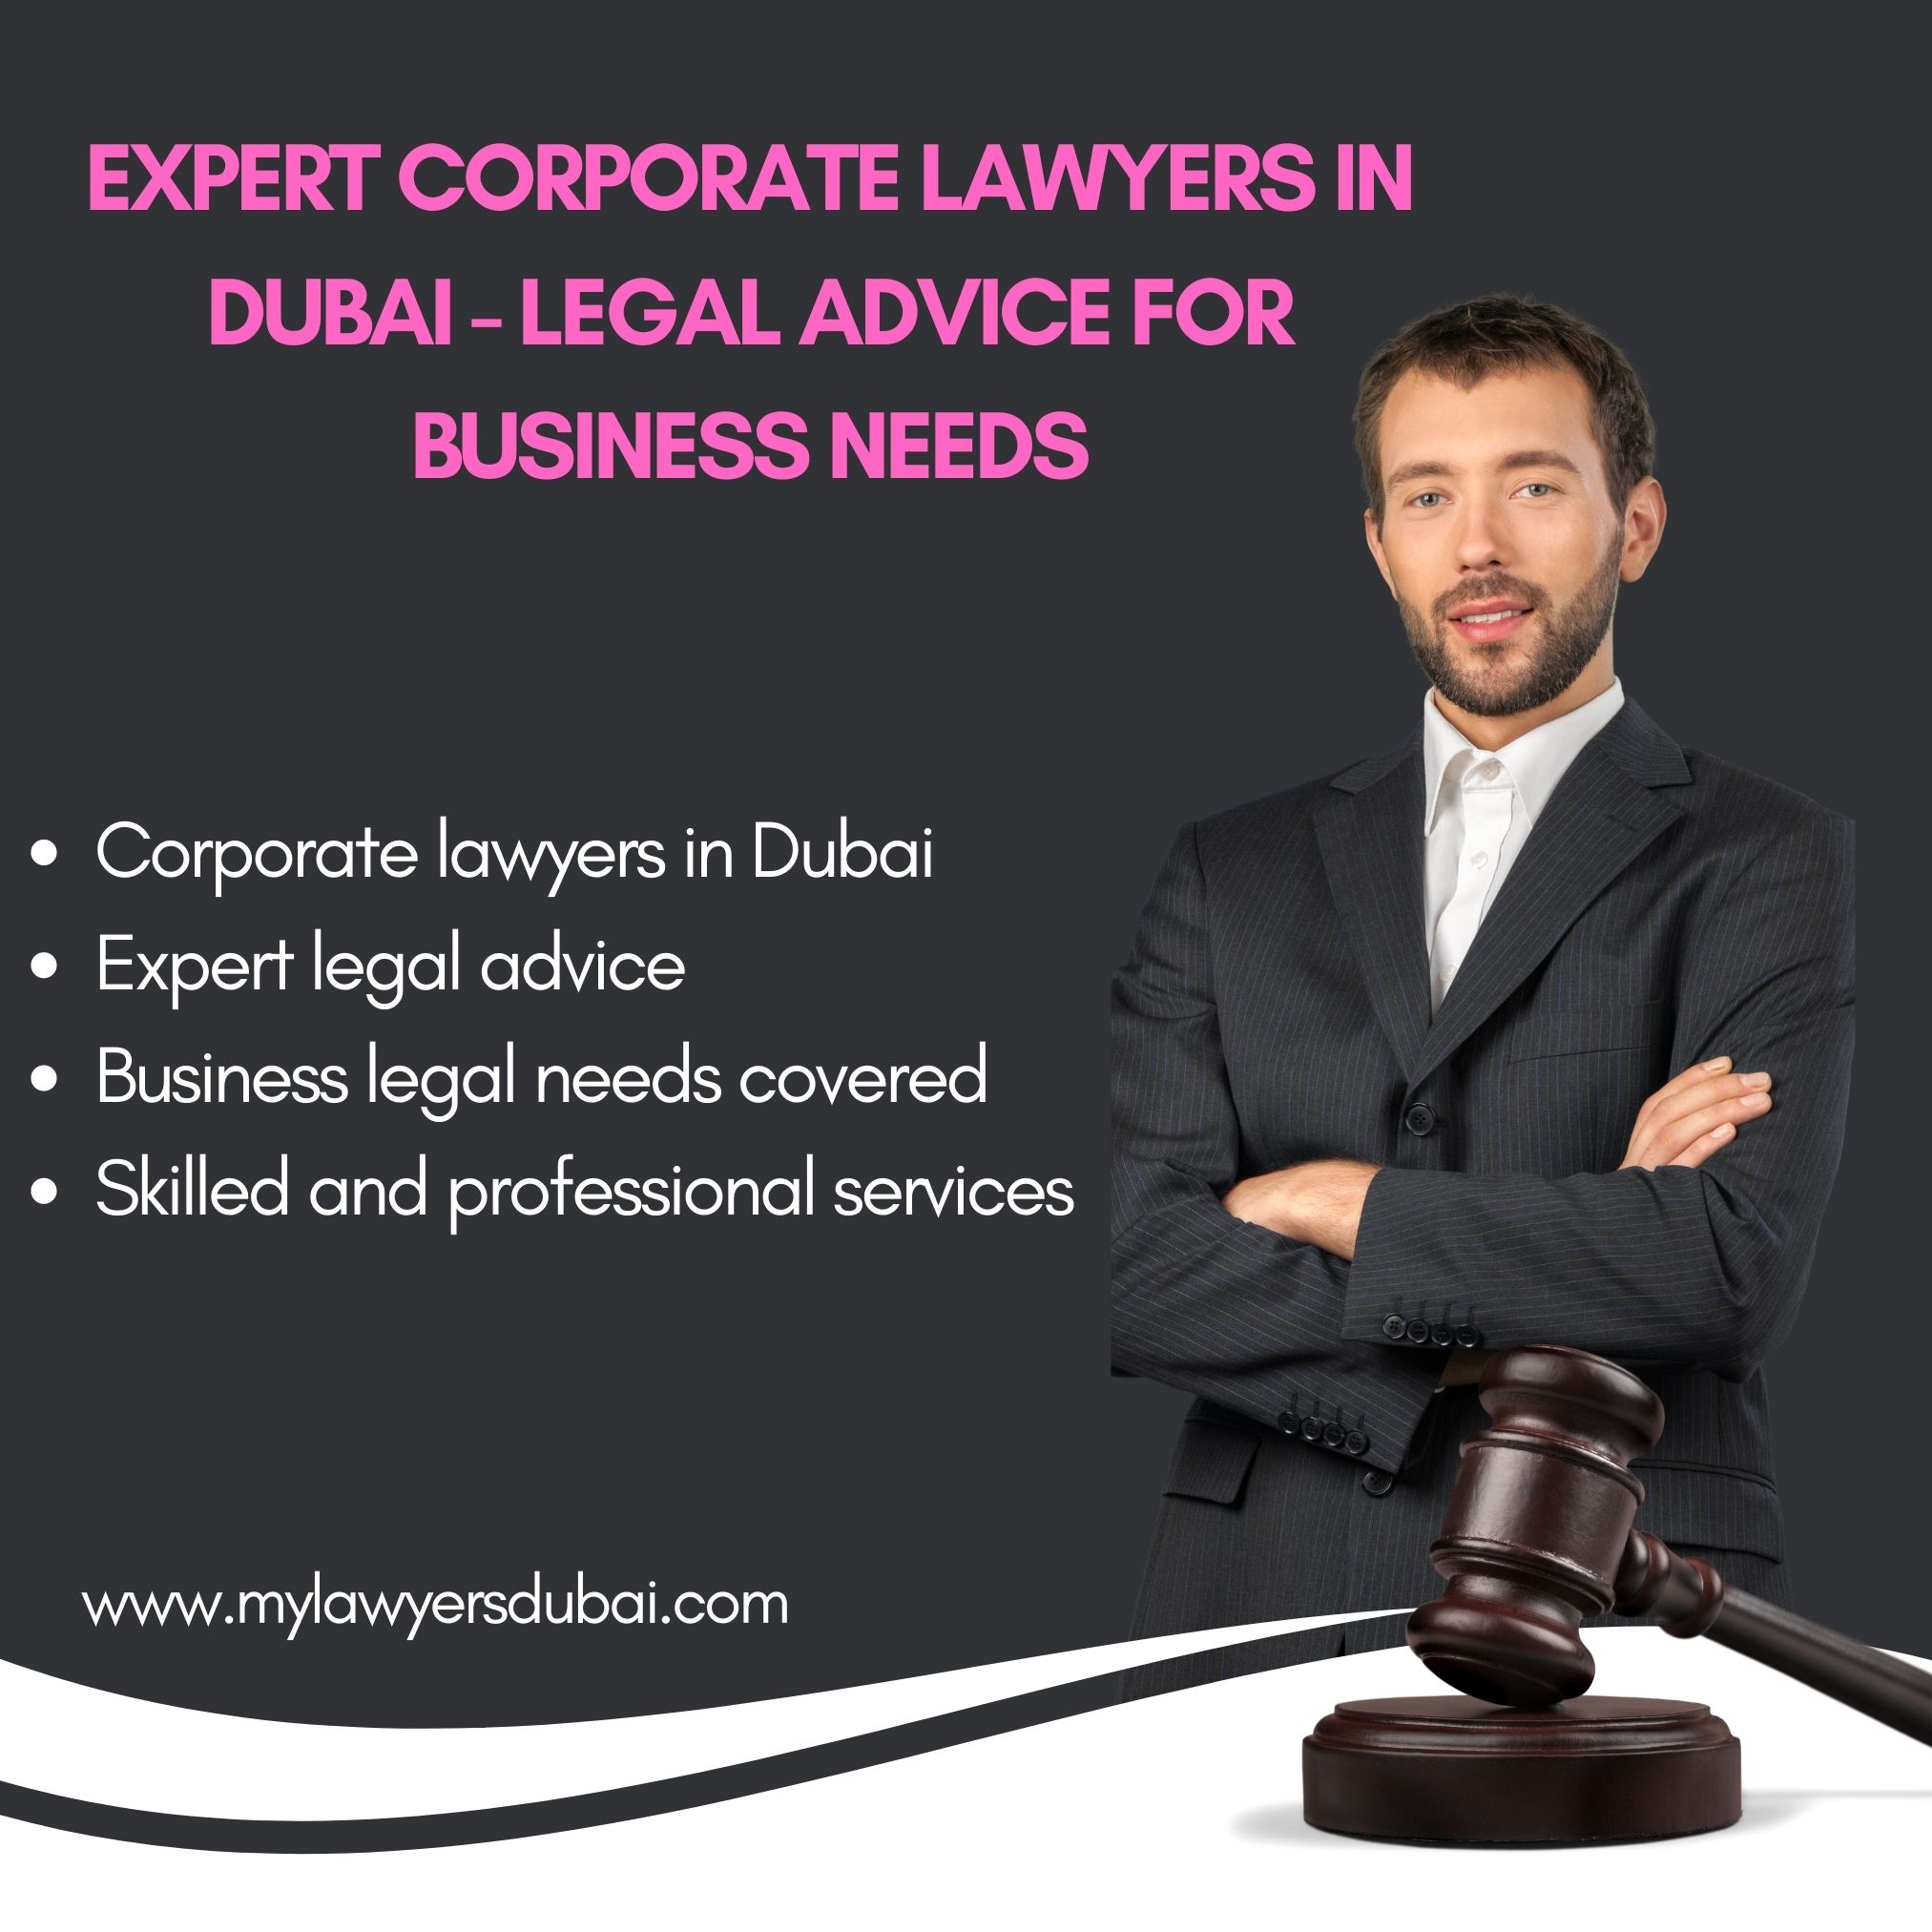 Skilled Corporate Lawyers in Dubai for Business Needs